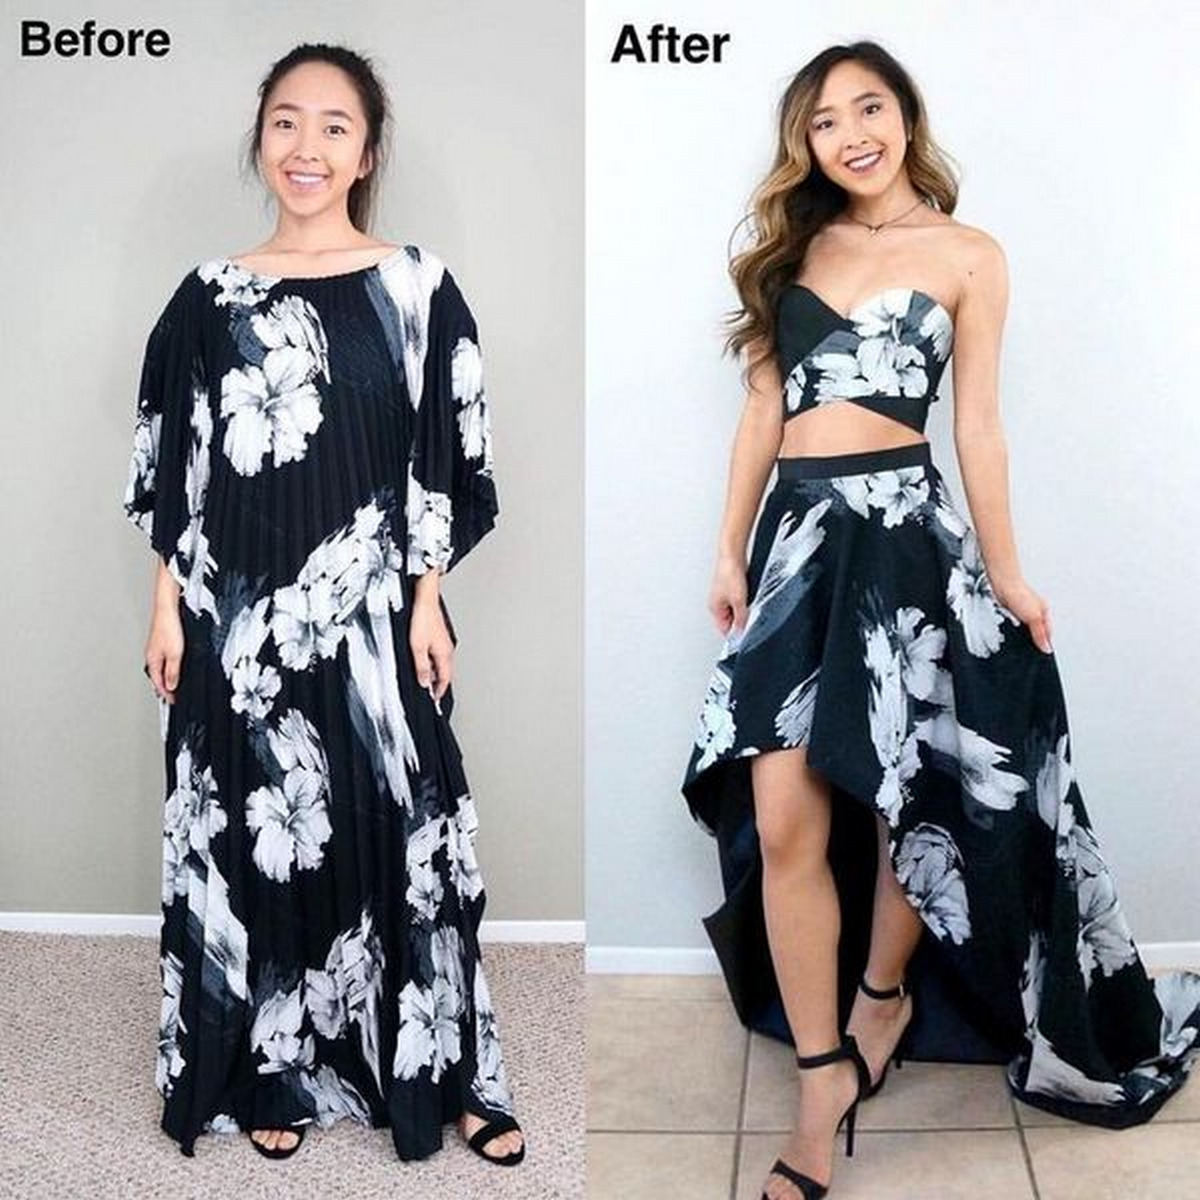 Turn Your Dress into a Skirt